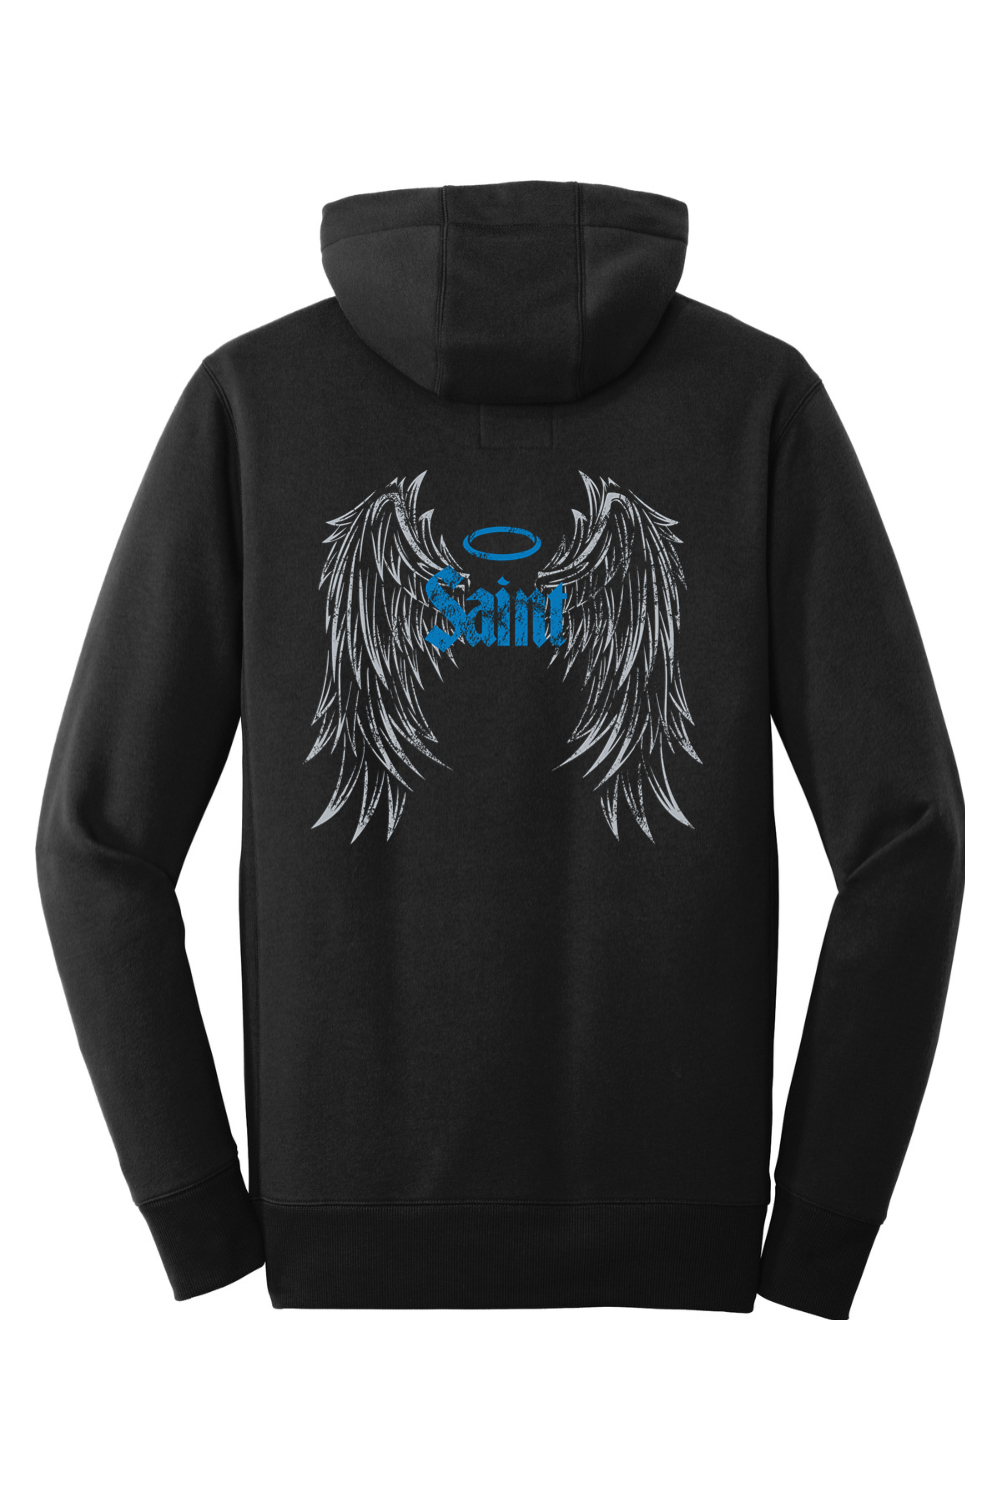 Saint Brown - New Era French Terry Pullover Hoodie